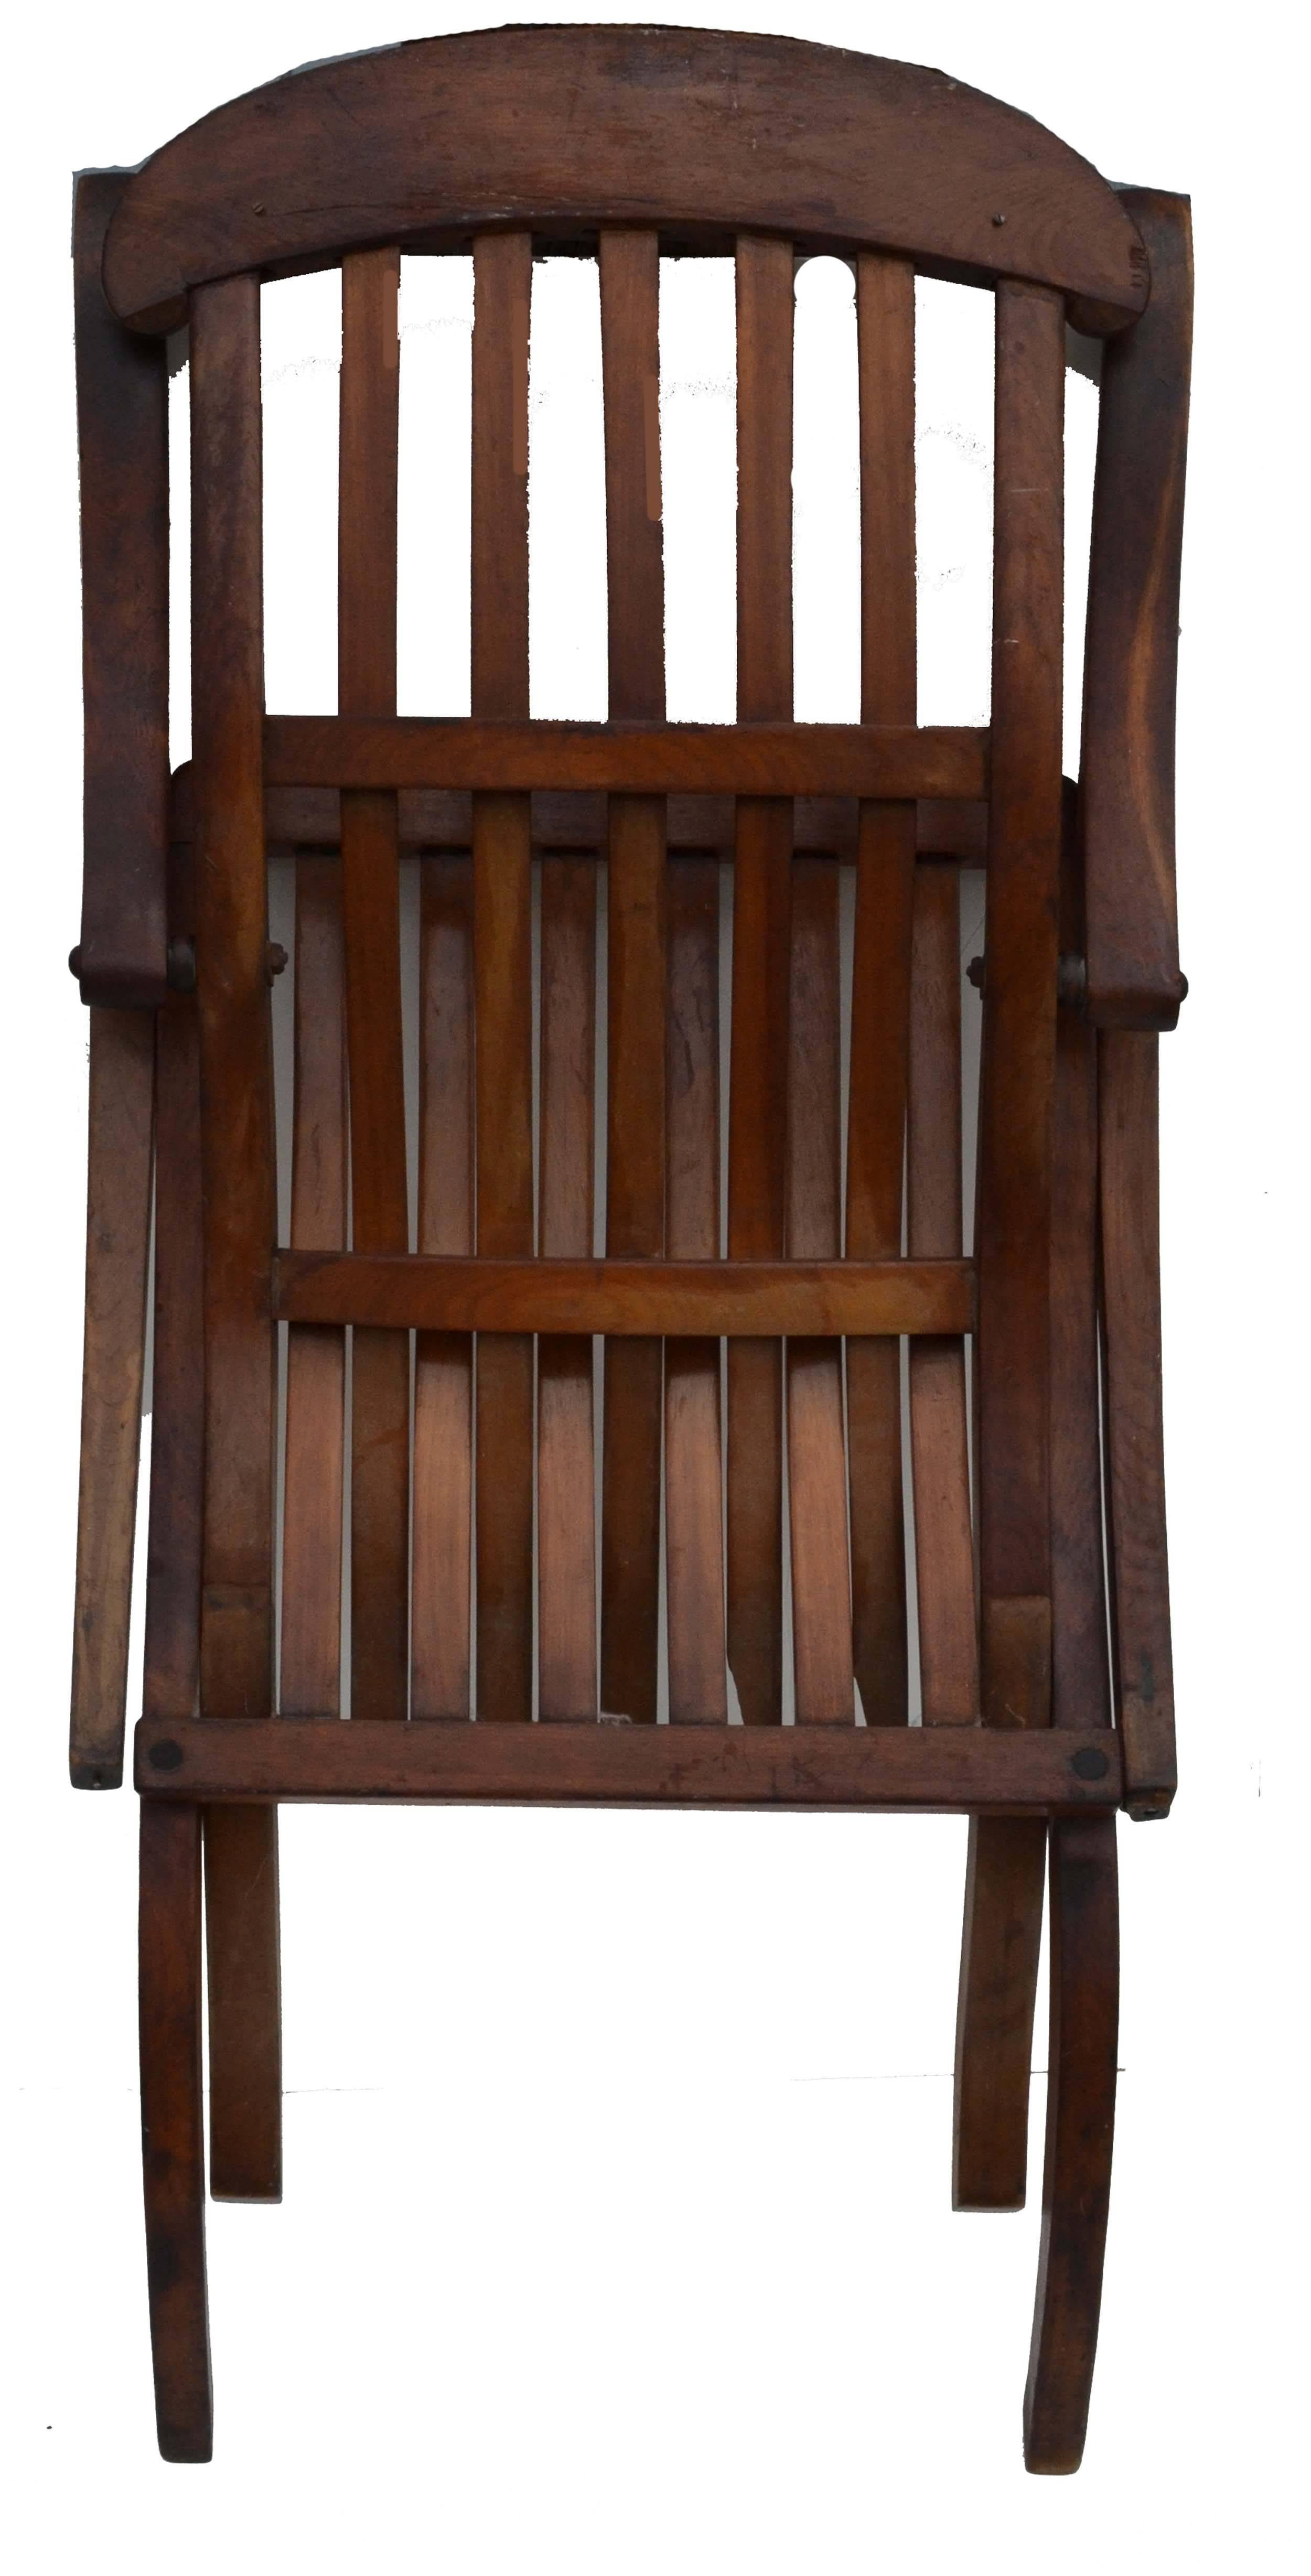 Hand-Crafted Early 20th Century Teak Folding Lounge Chair